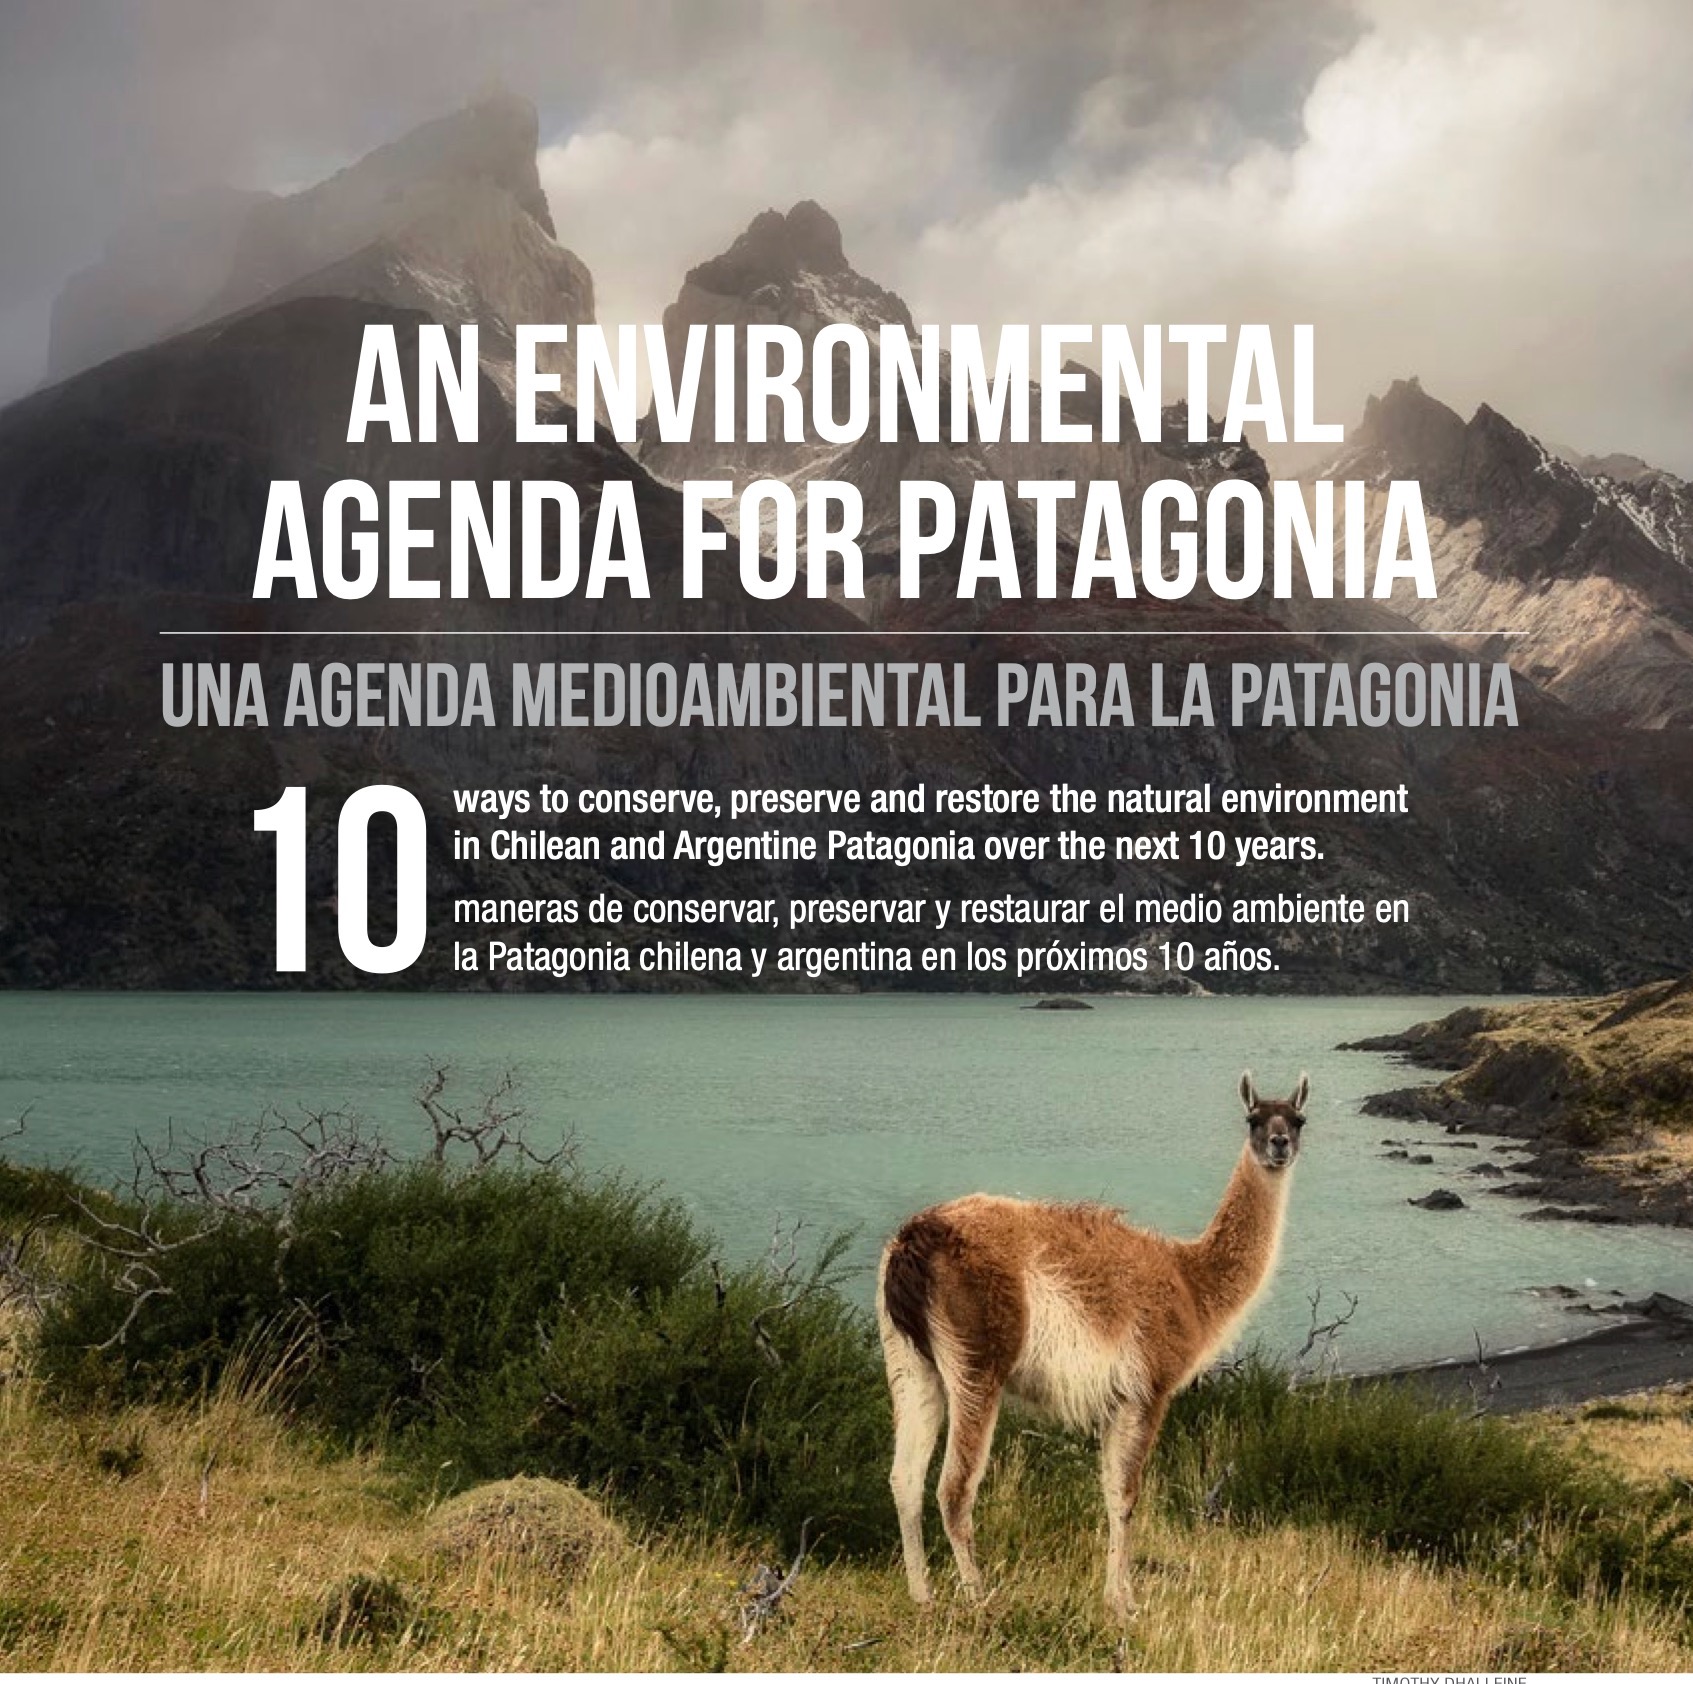 Read “An Environmental Agenda for Patagonia” in the current edition of Patagon Journal. 